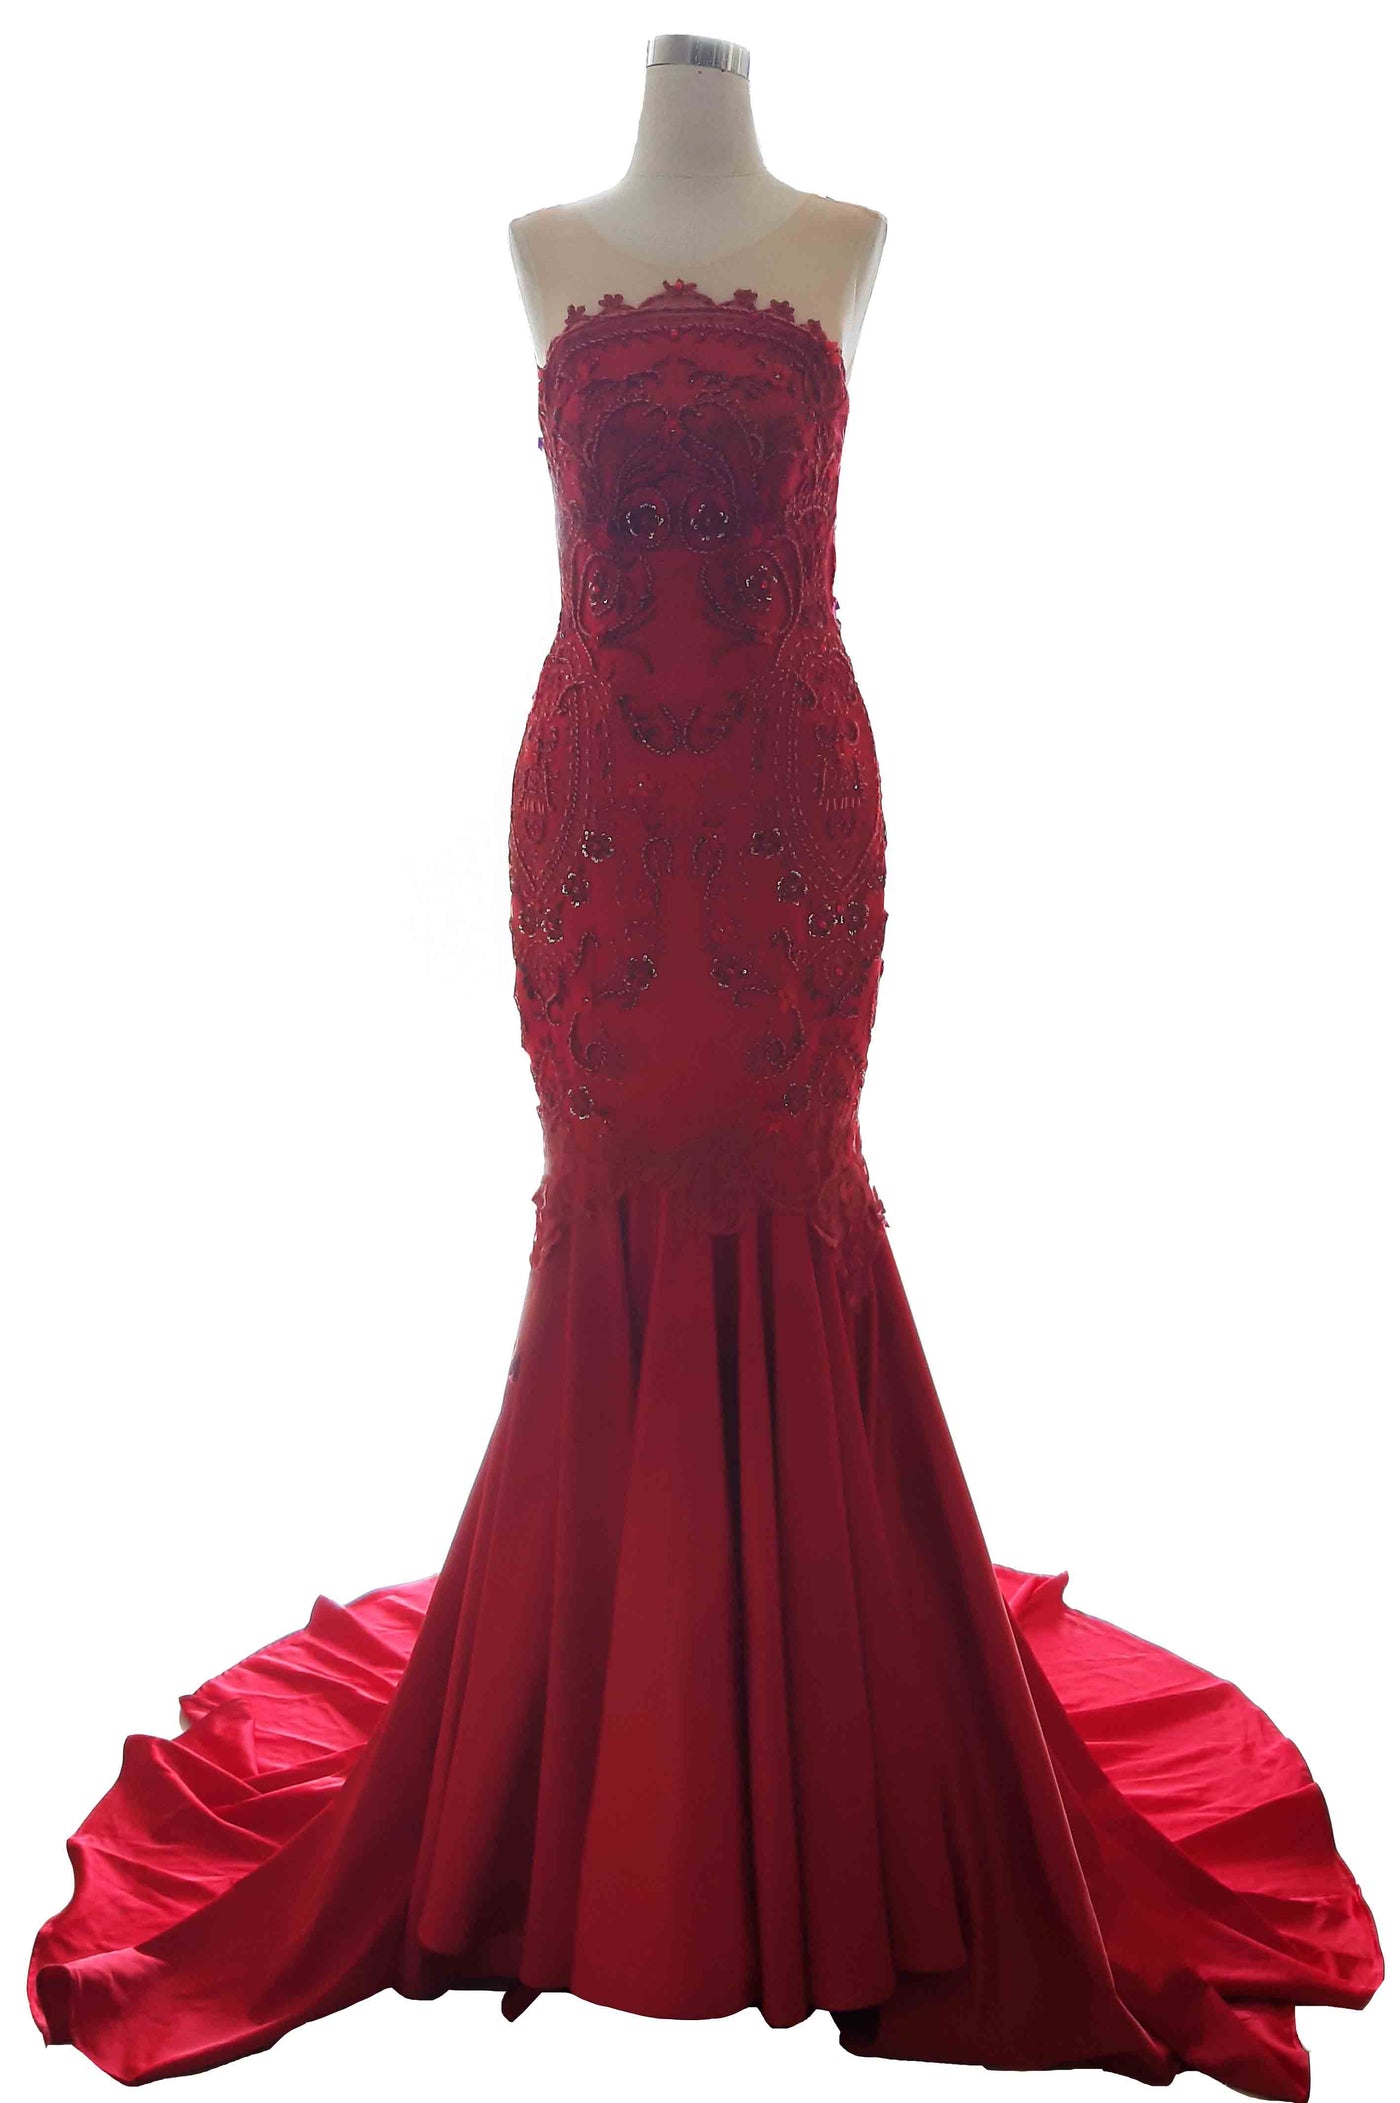 Rent: Private Label - Curved Strapless Red Mermaid Gown